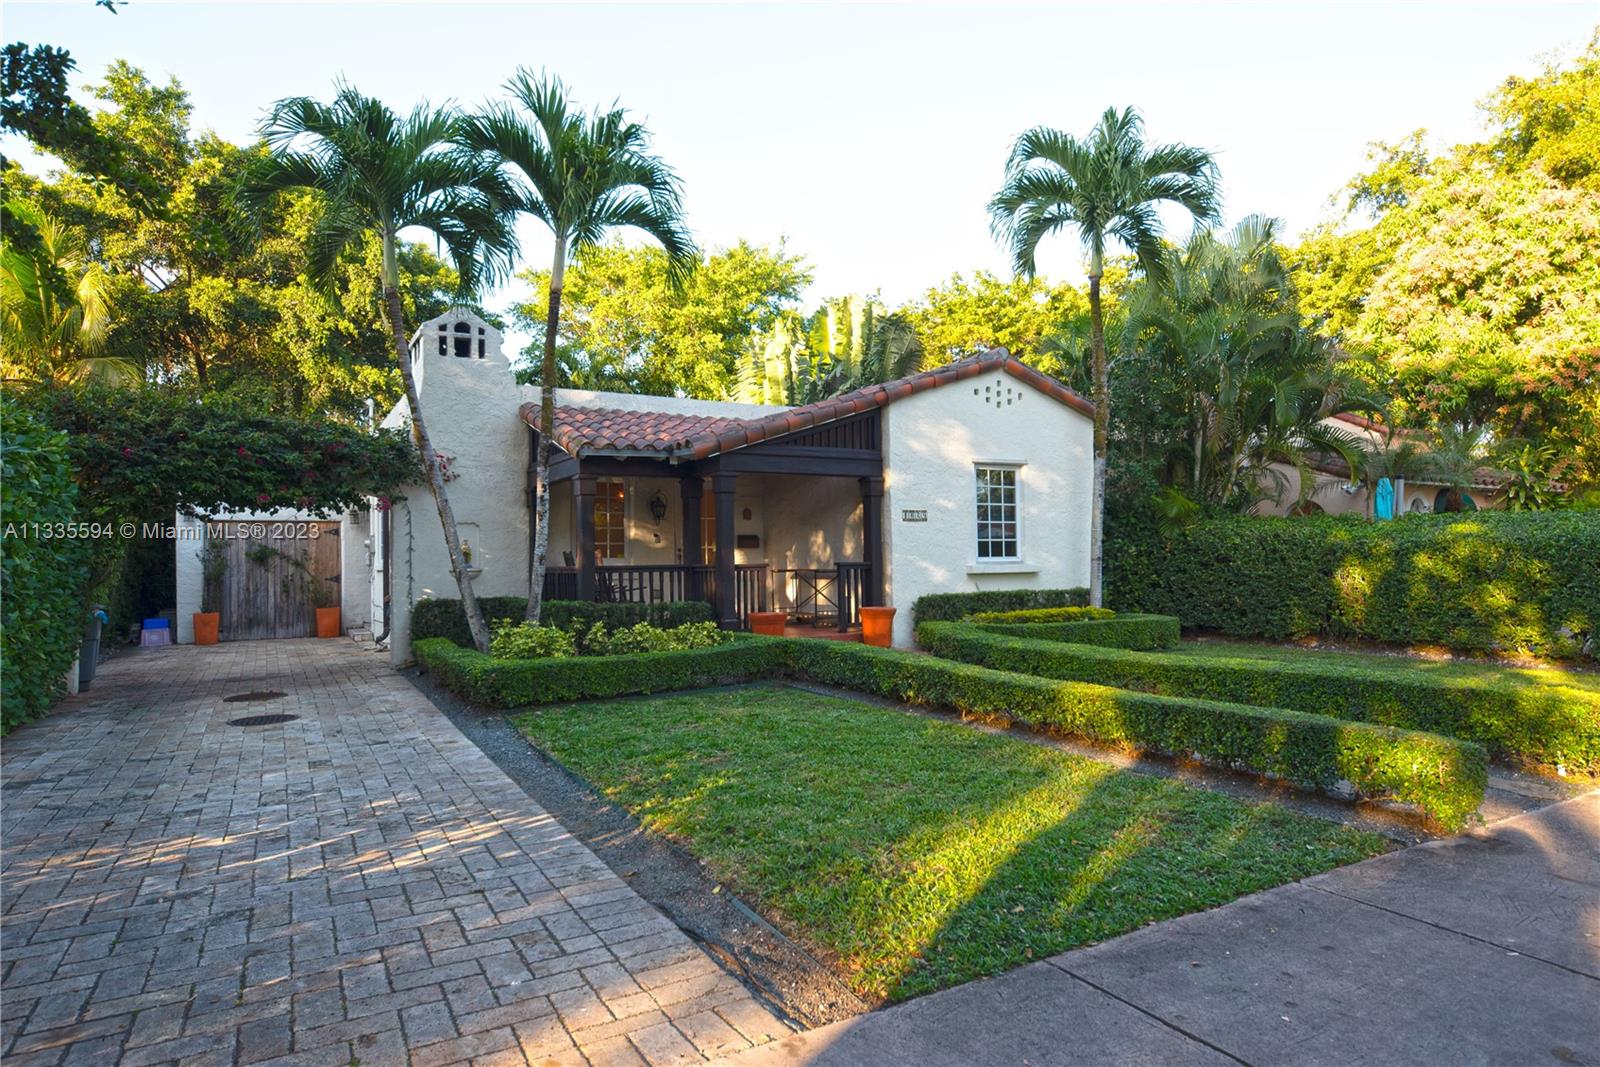 Charming 1920's home in the heart of Coral Gables awaits you! This beautiful residence is comprised of a total of 4-bedrooms & 3-baths distributed between a 3/2 in the main house and a separate 1/1 in-law's quarters. With cozy front porch, original wood floors, fireplace, & covered patio this home is sure to enchant you. And with impact windows throughout, you will have the security that you need. Located walking distance to Venetia & Majorca Parks, Granada Golf Course, Publix & Sedano's supermarkets, Roma Bakery & more! We look forward to giving you the tour!